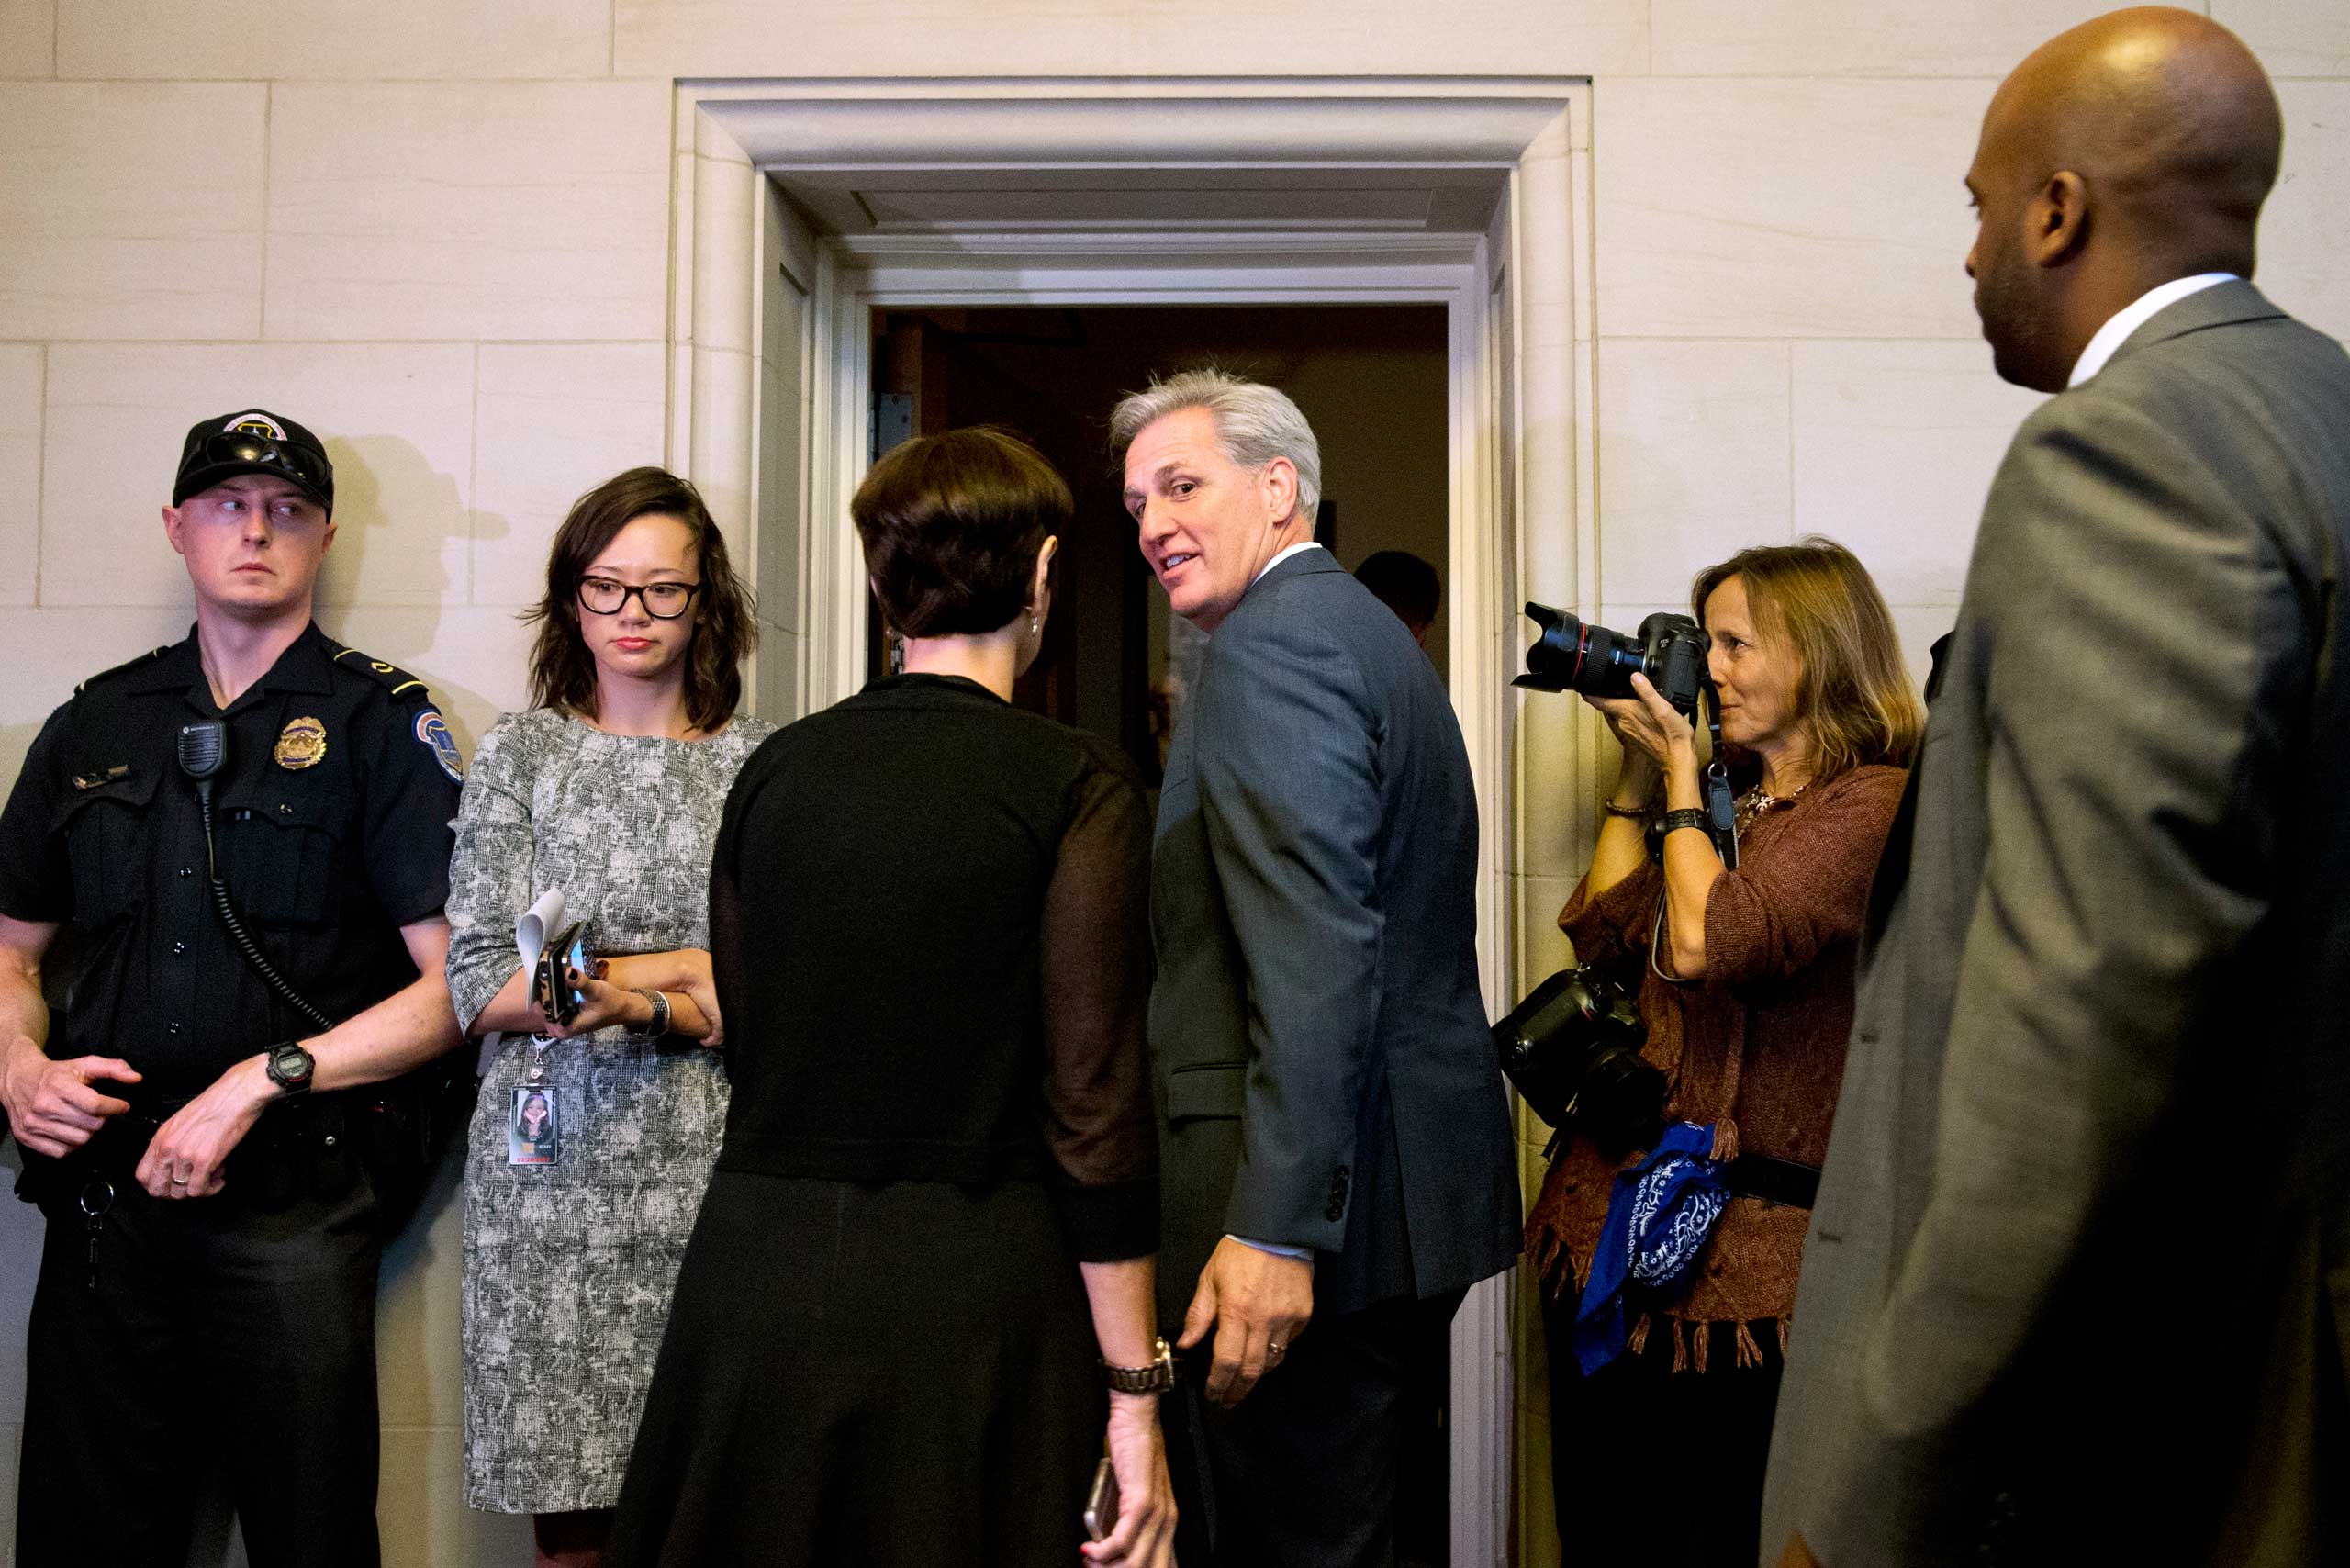 House Majority Leader Kevin McCarthy of Calif., center, turns to his wife Judy McCarthy as they enter a House Republican caucus vote on its nominee to replace House Speaker John Boehner, in Washington D.D., Oct. 8, 2015. (Jacquelyn Martin—AP)